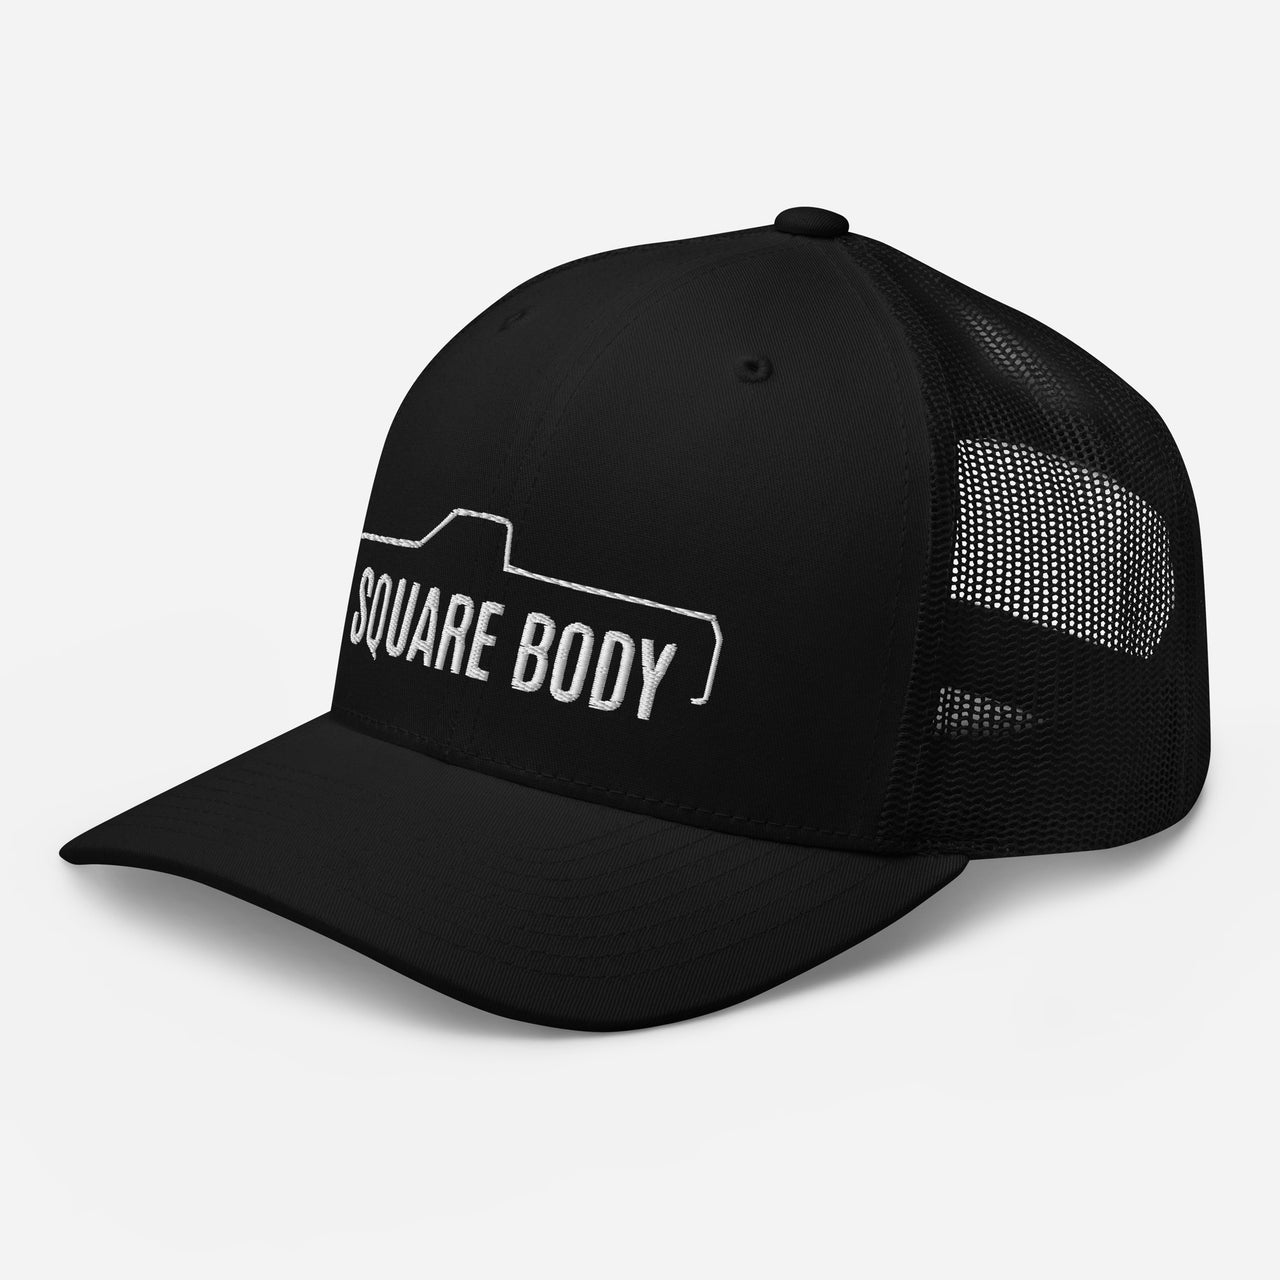 3/4 view of Square body c10 k10 trucker hat from aggressive thread in black